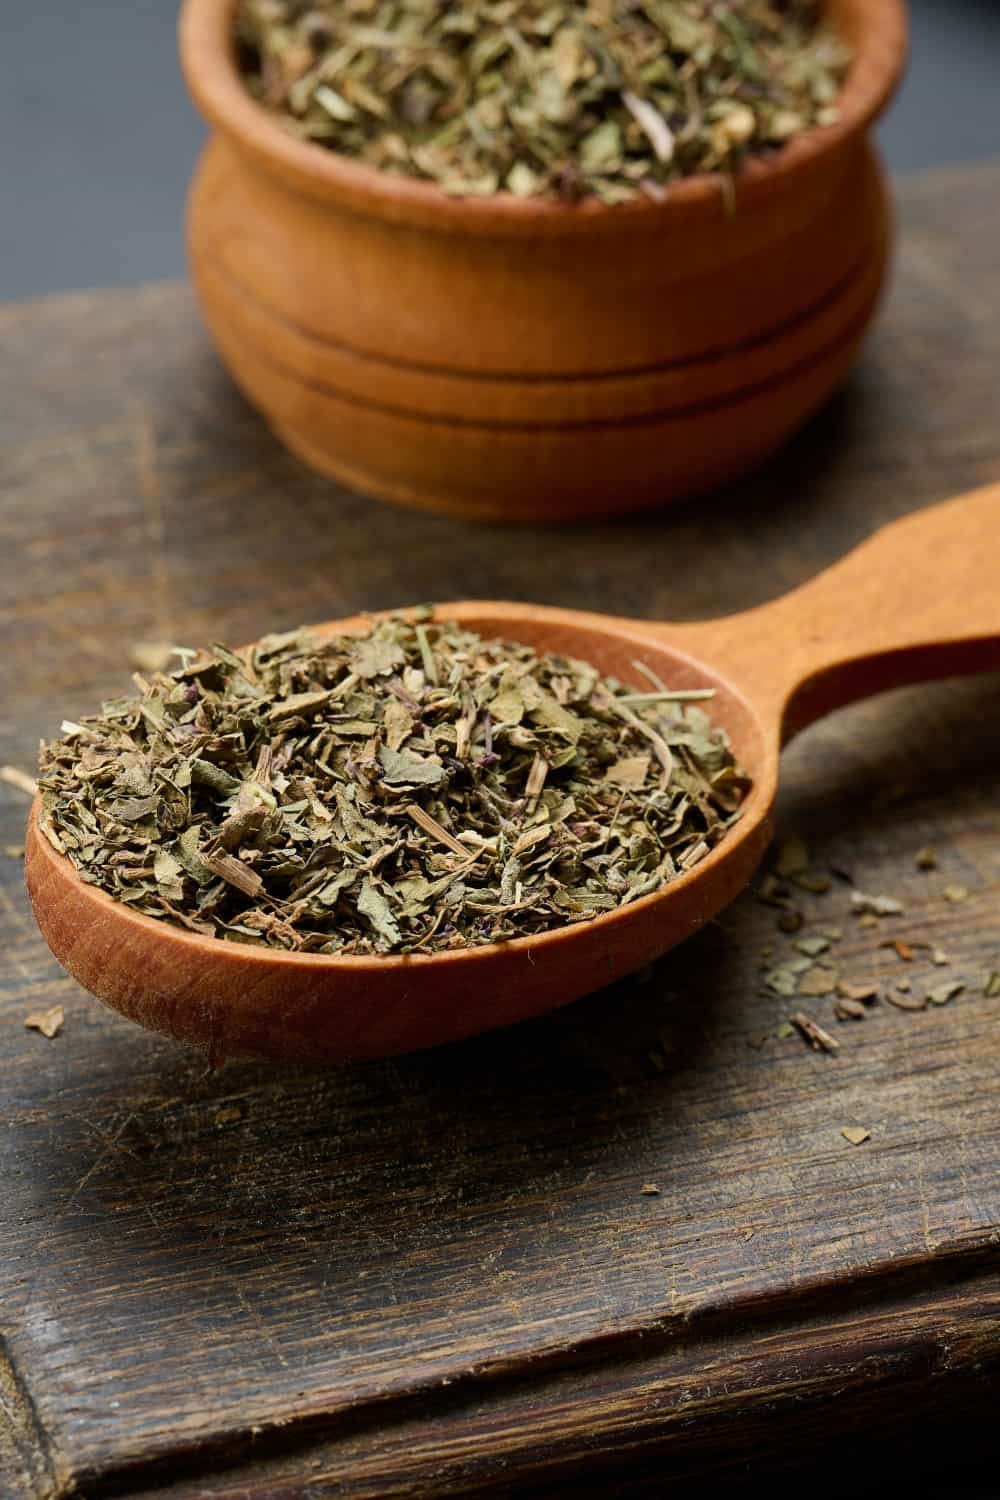 Dry basil in a wooden spoon on the table, seasoning